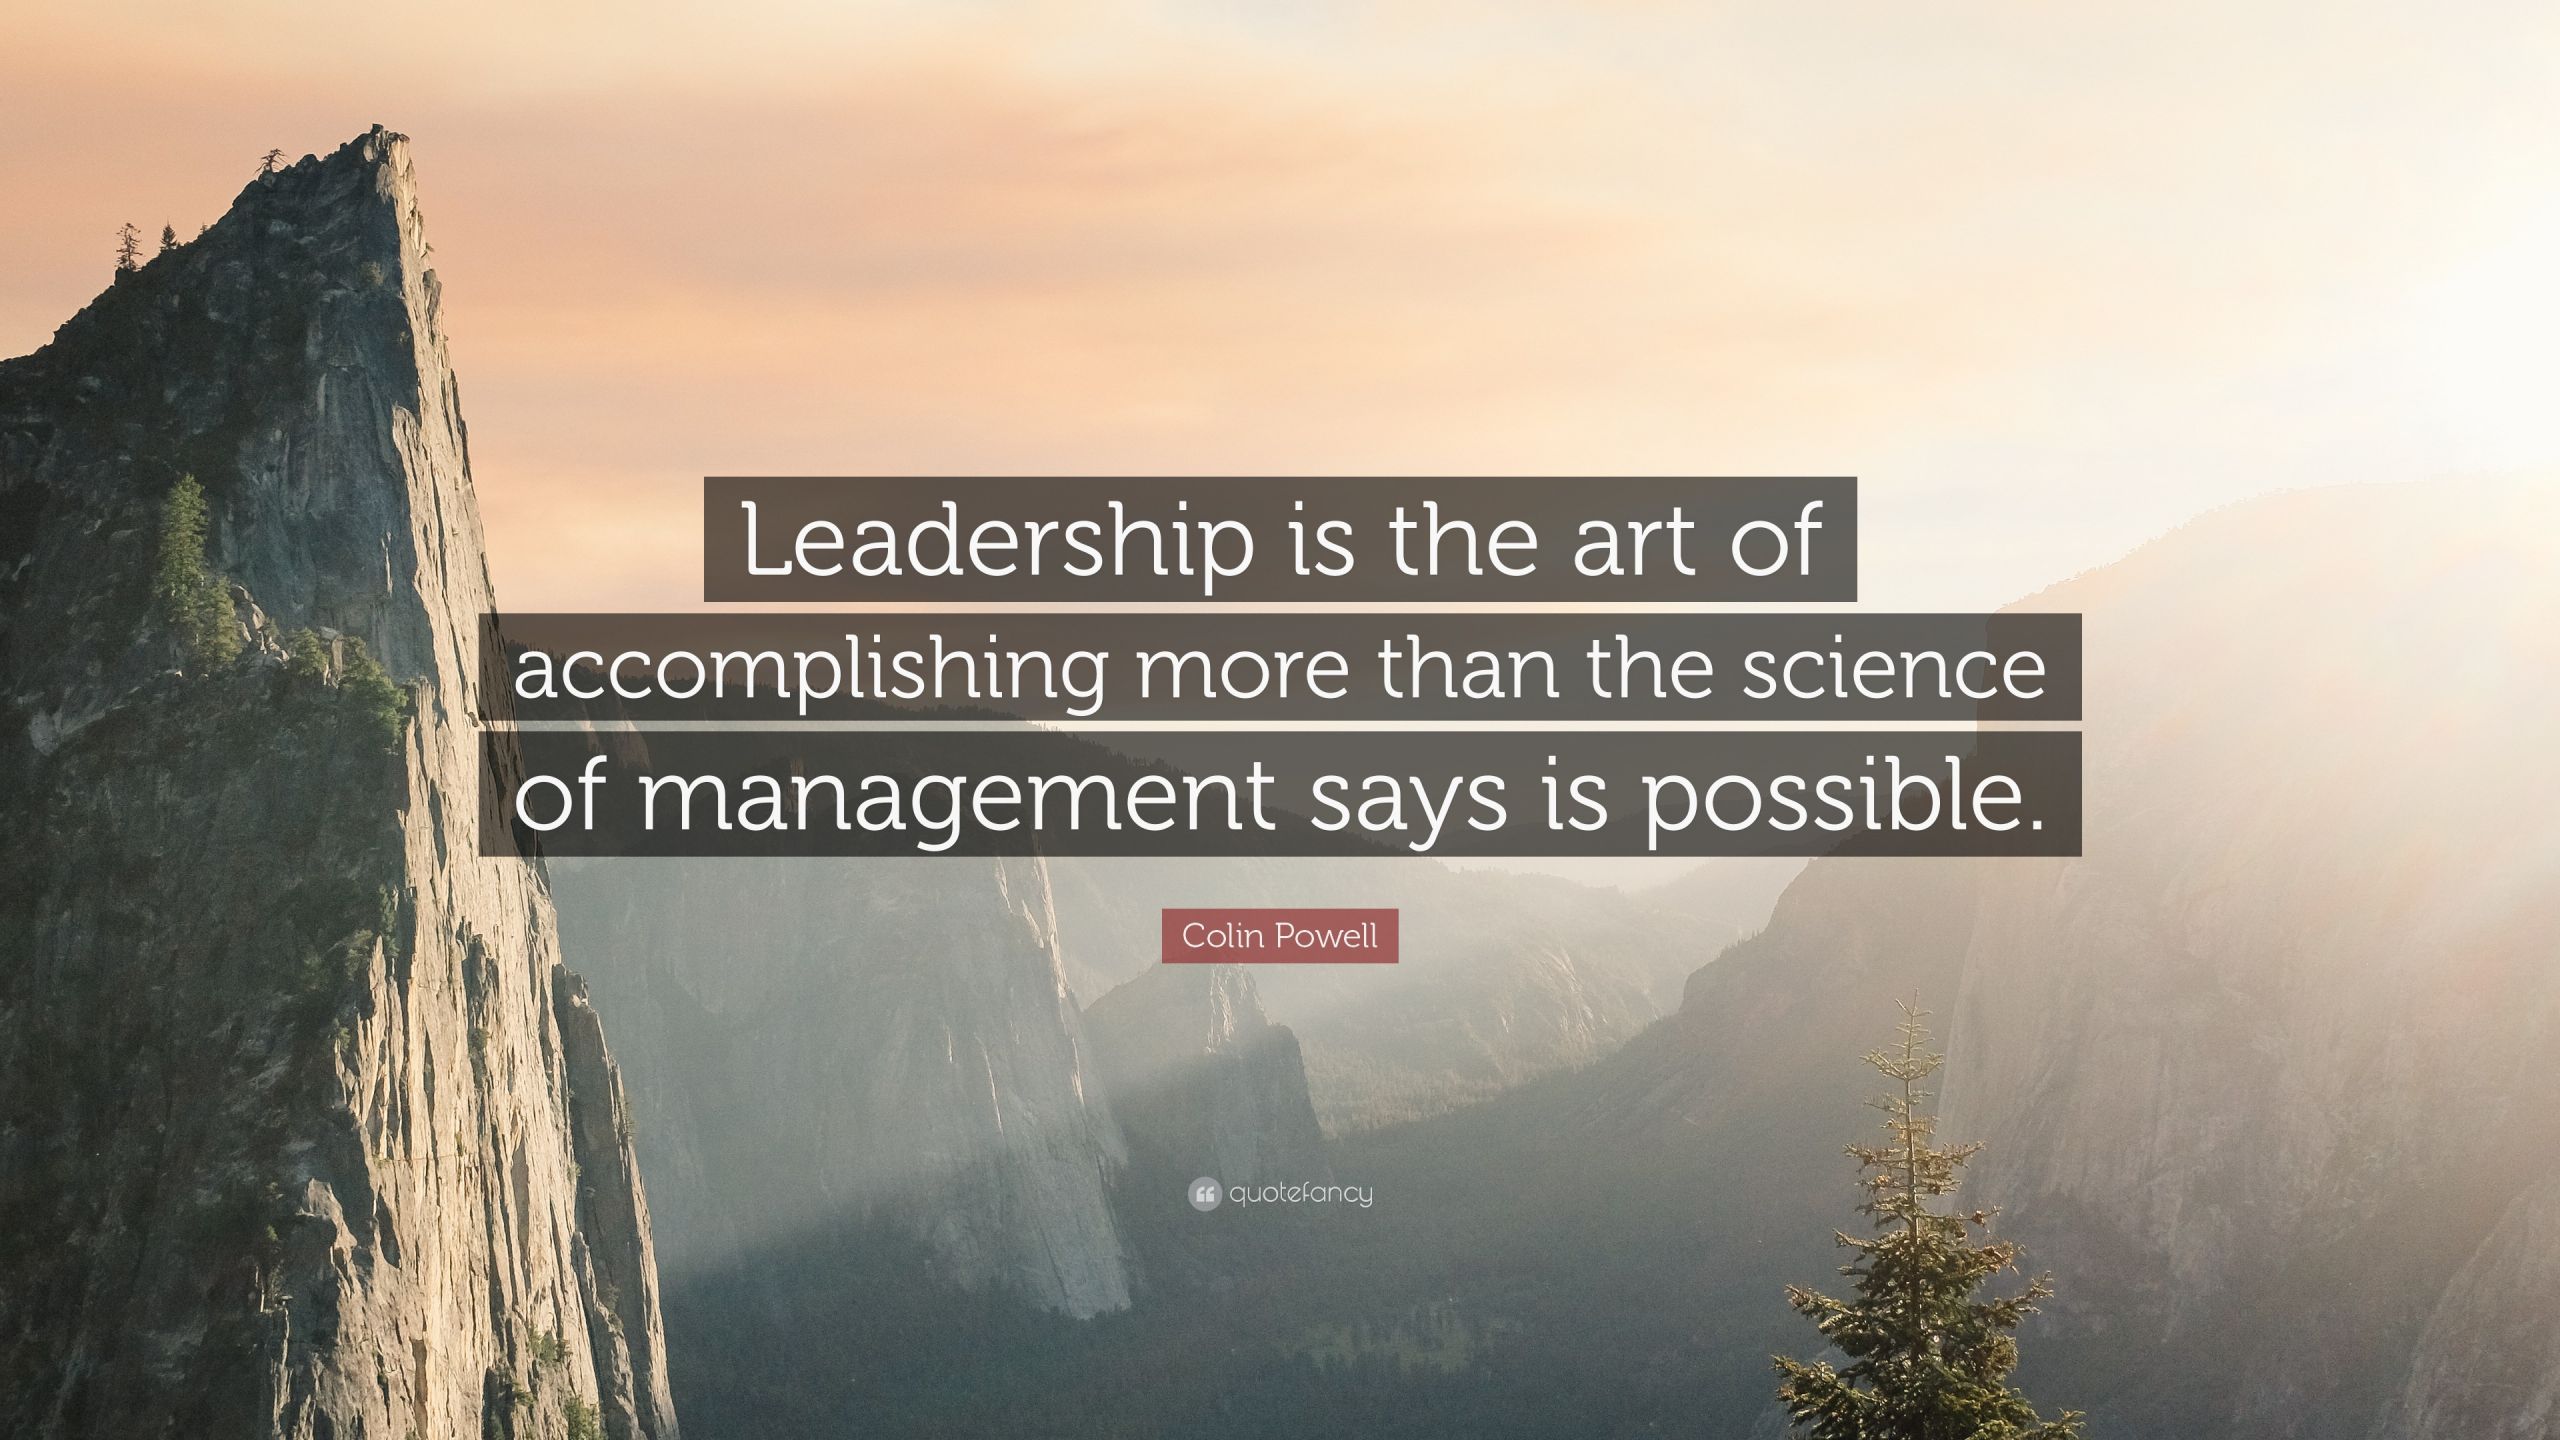 Colin Powell Quote Leadership
 Colin Powell Quote “Leadership is the art of